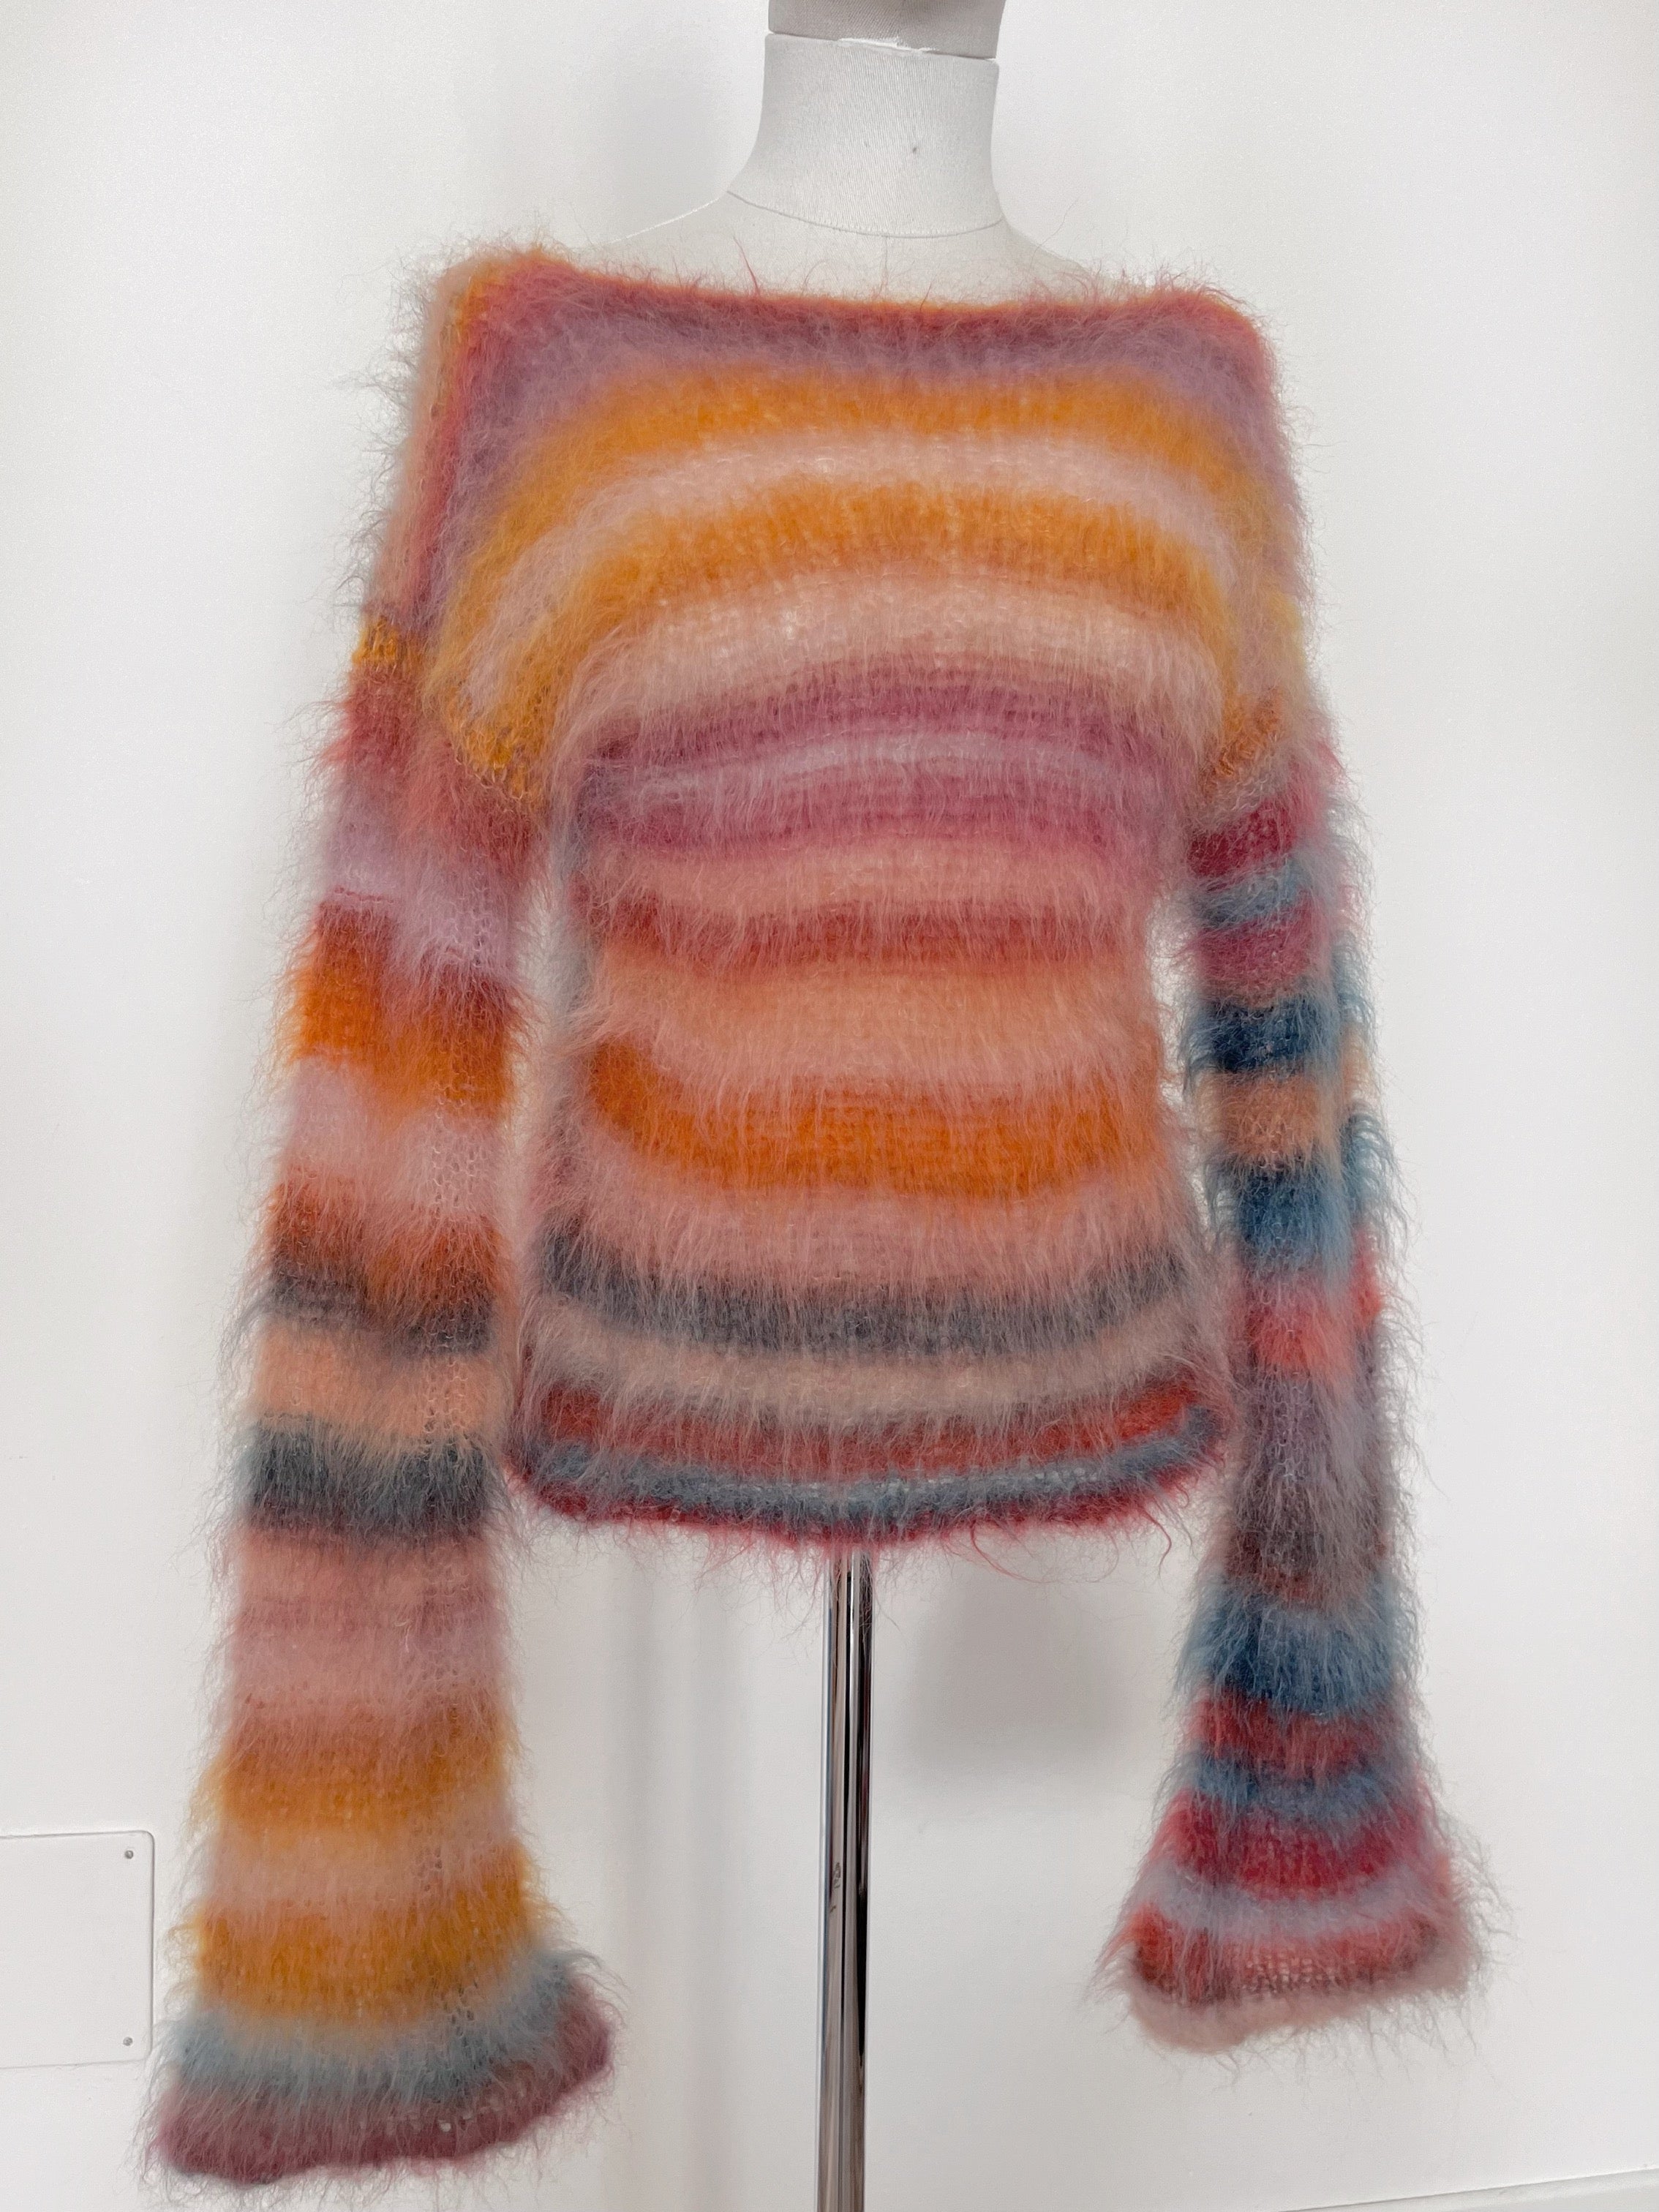 Brushed mohair sweater